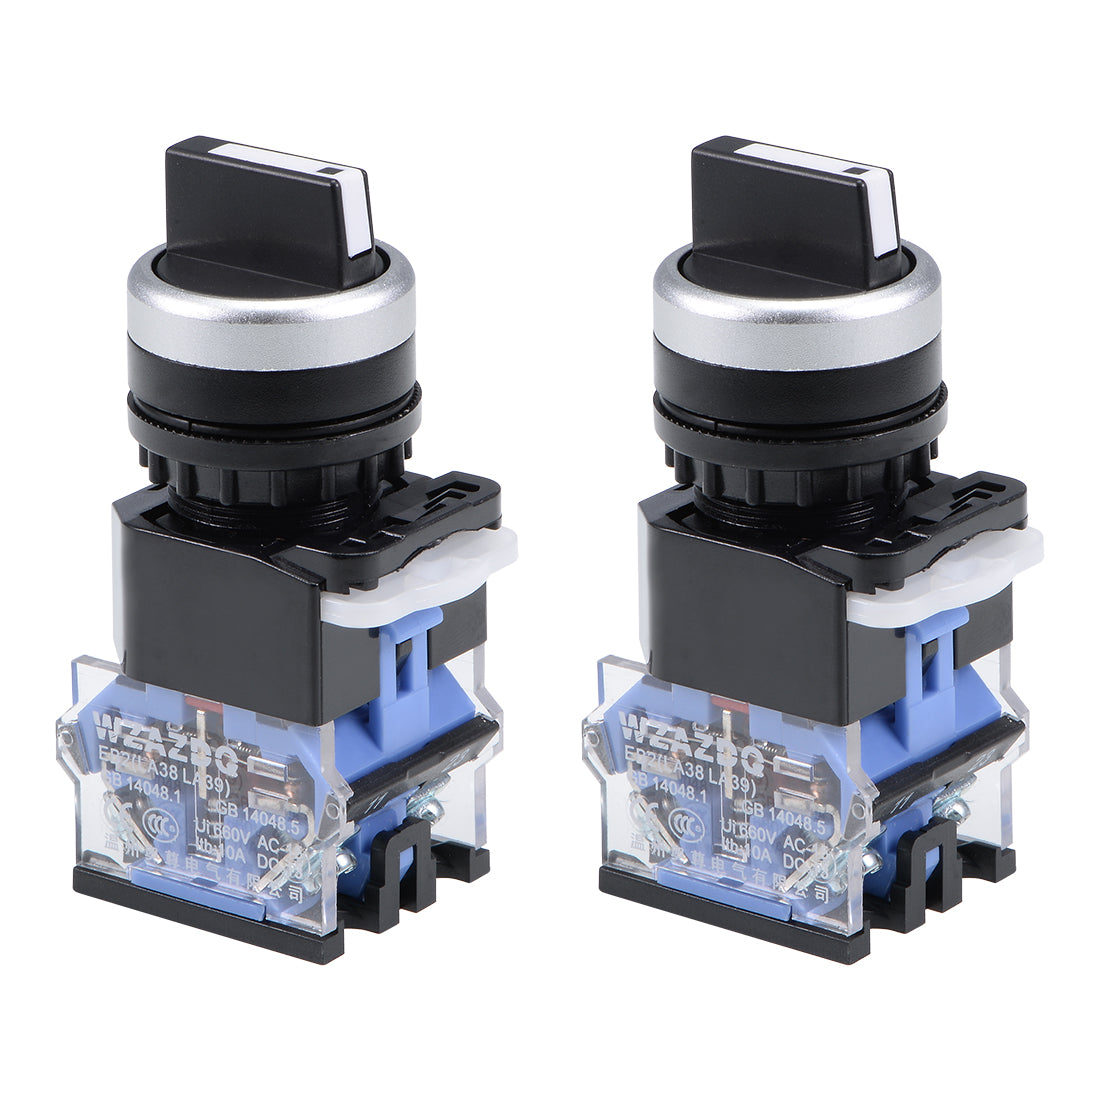 uxcell Uxcell Rotary Selector Switch 3 Positions 2NC Self-Lock Latching AC 660V 10A 22mm Panel Mount 2pcs